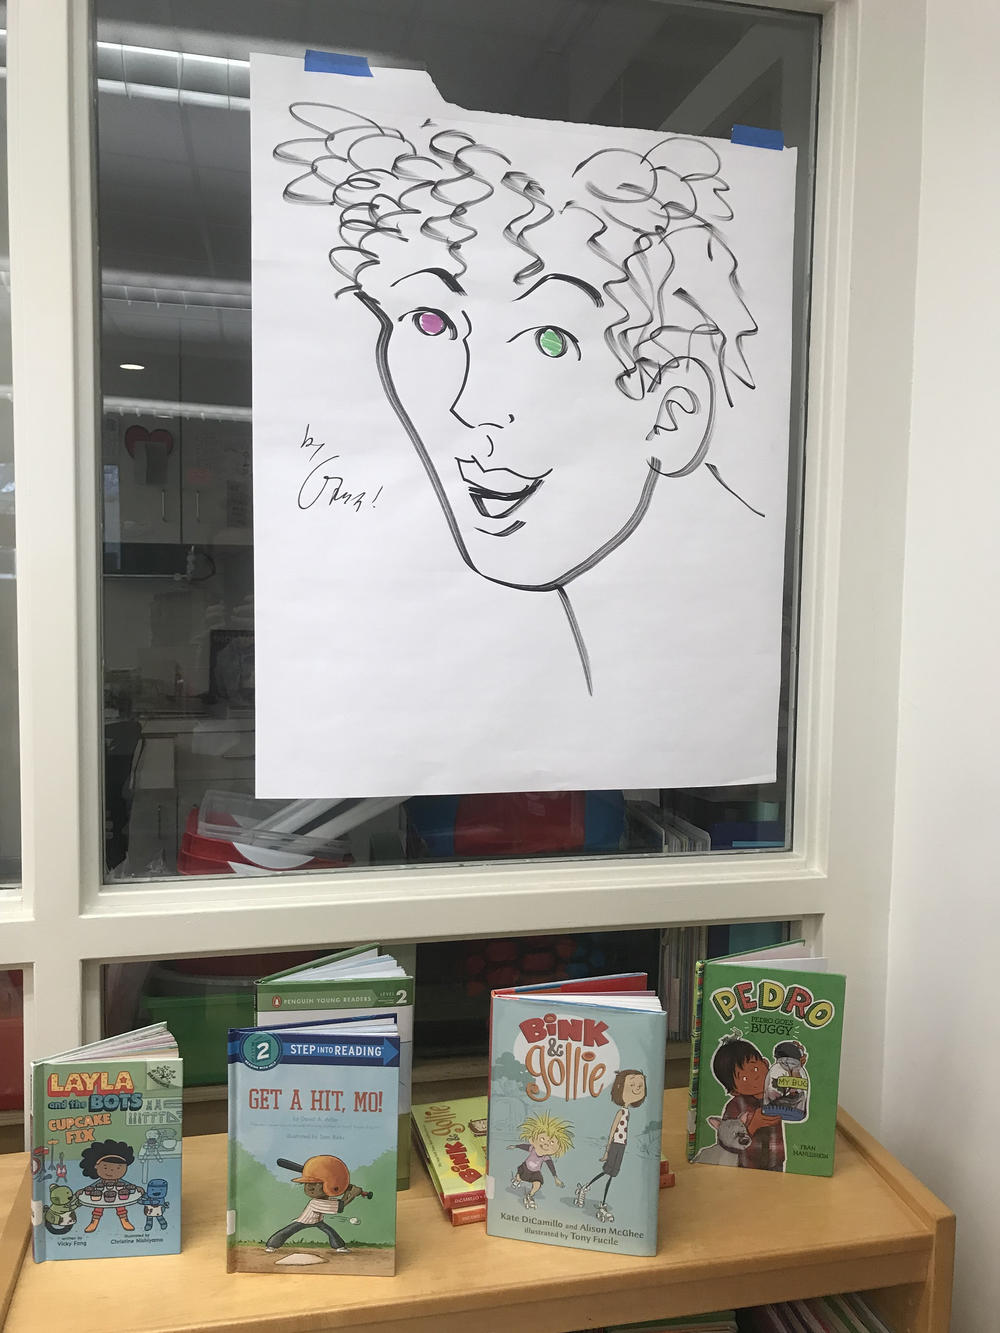 On his visit to Brent Elementary School in Washington, DC, George O'Connor drew an impromptu Dionysos on the spot.